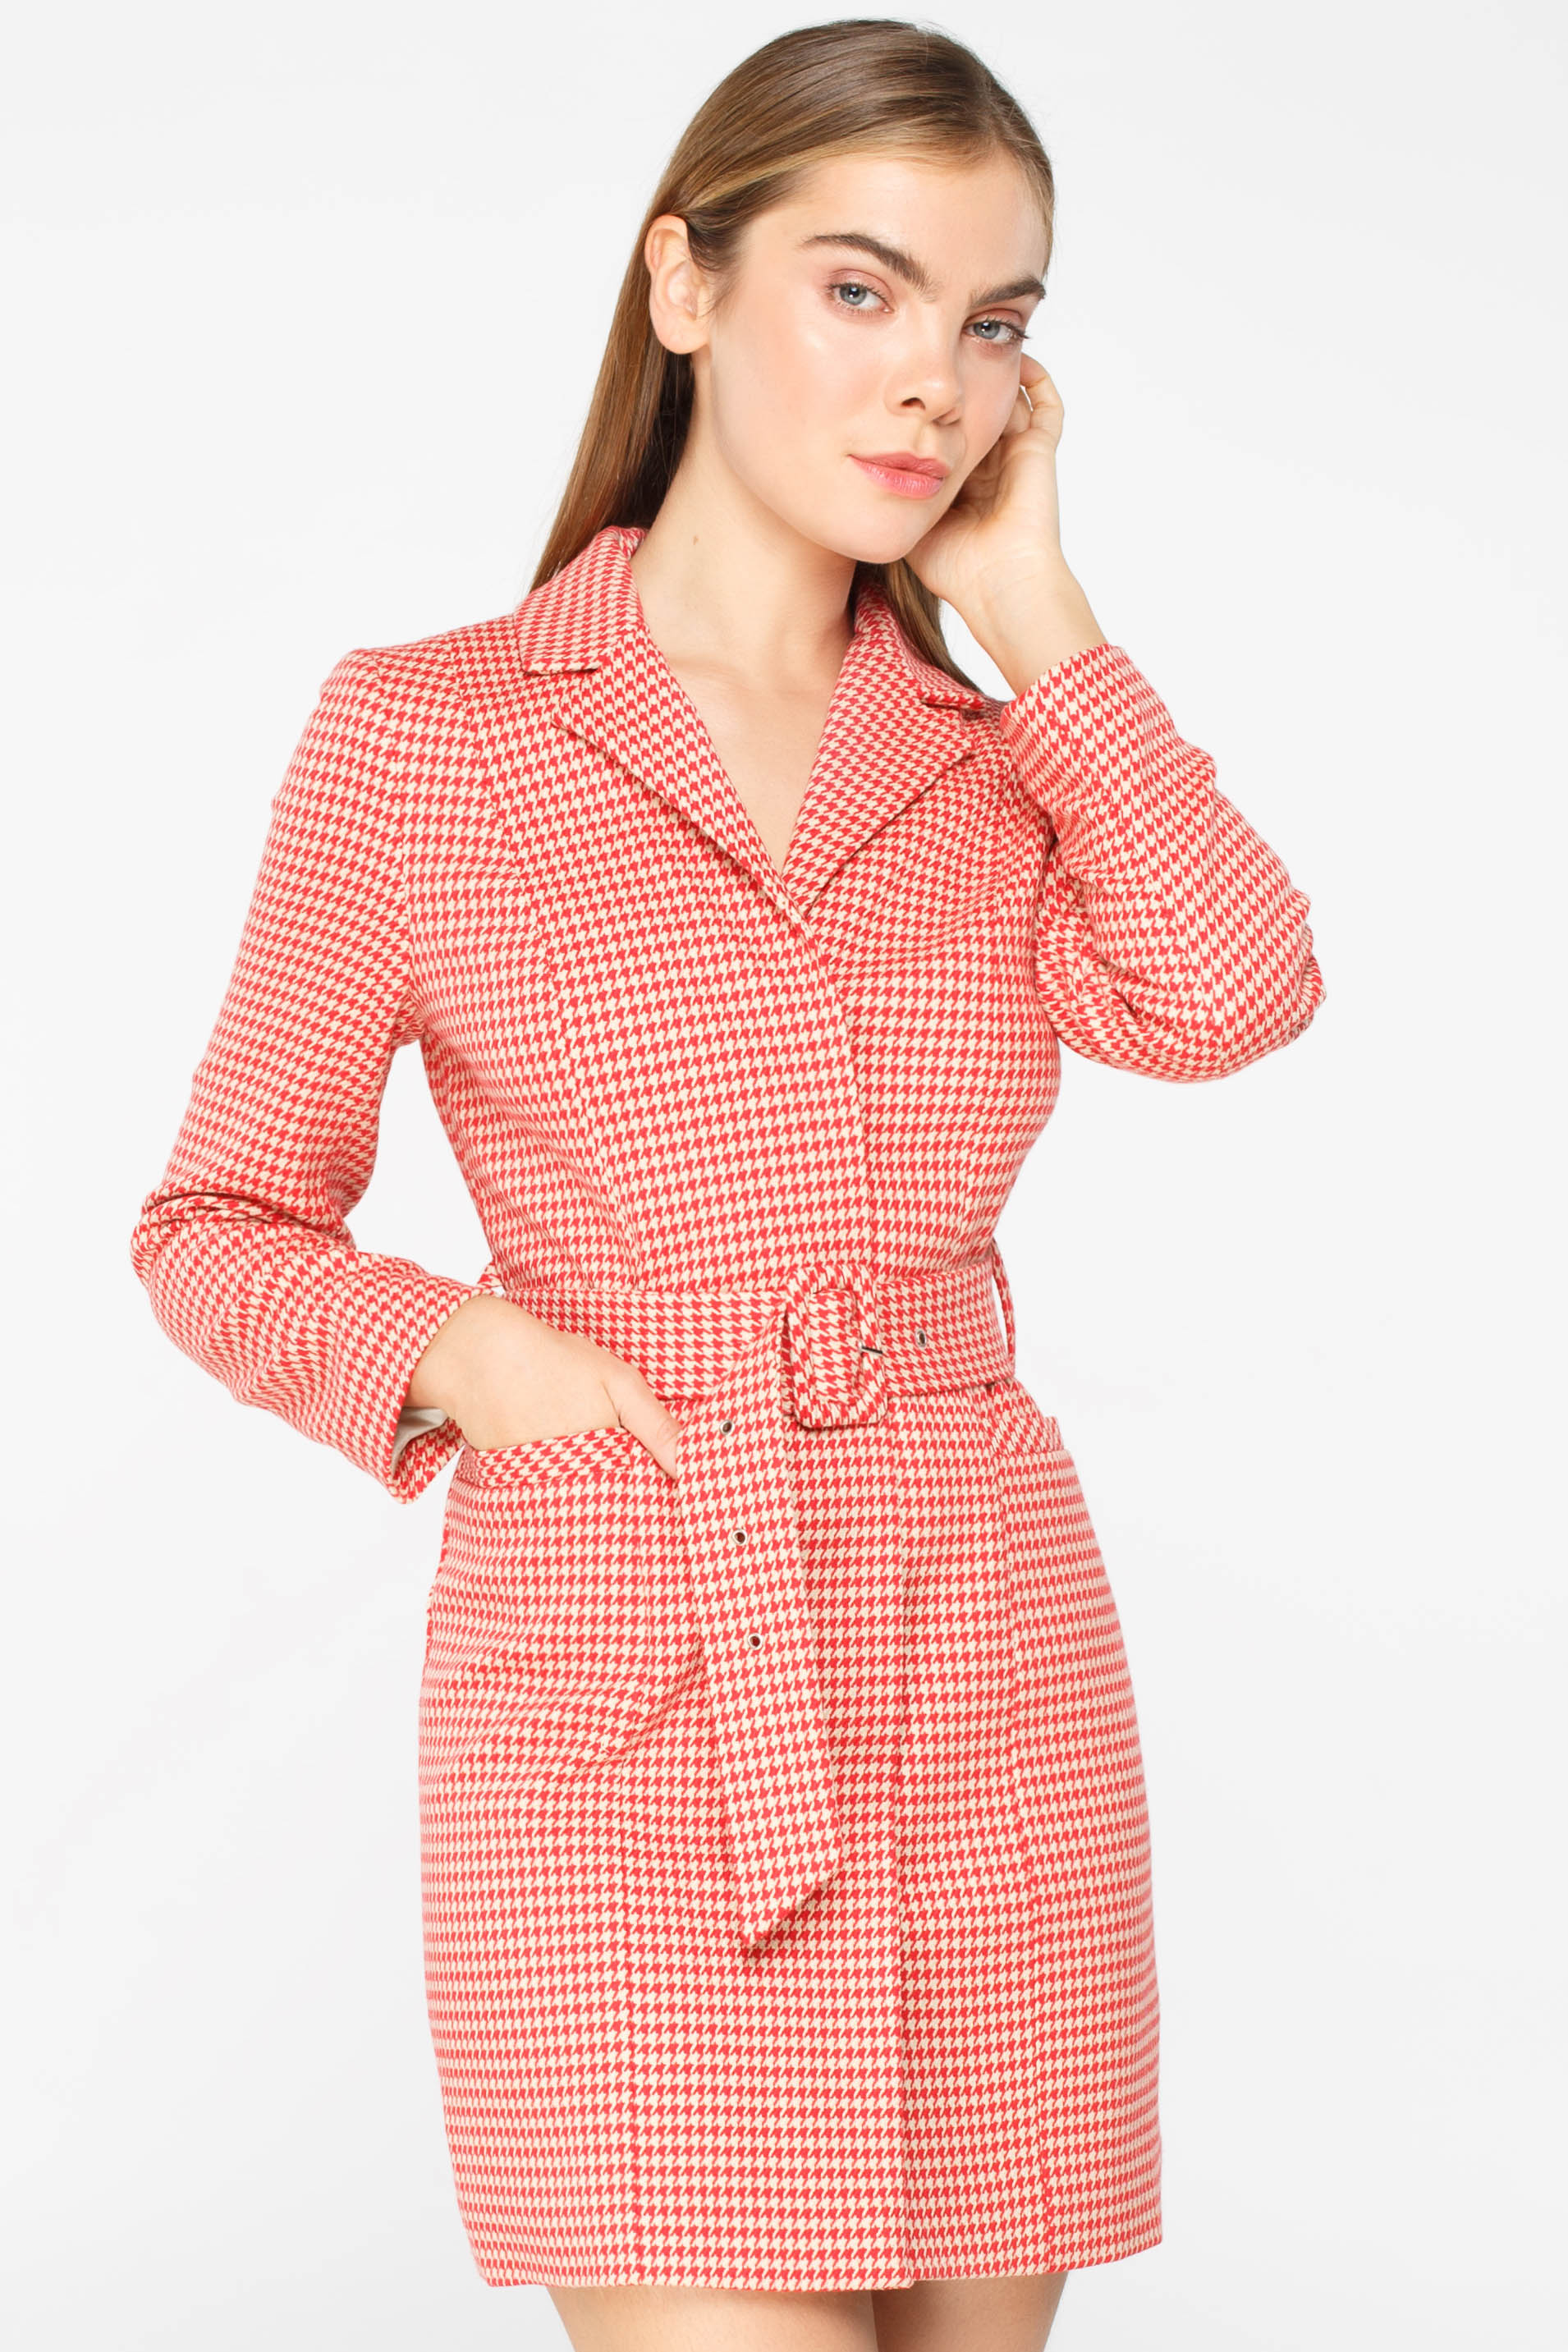 Red and beige houndstooth belted blazer dress, photo 1